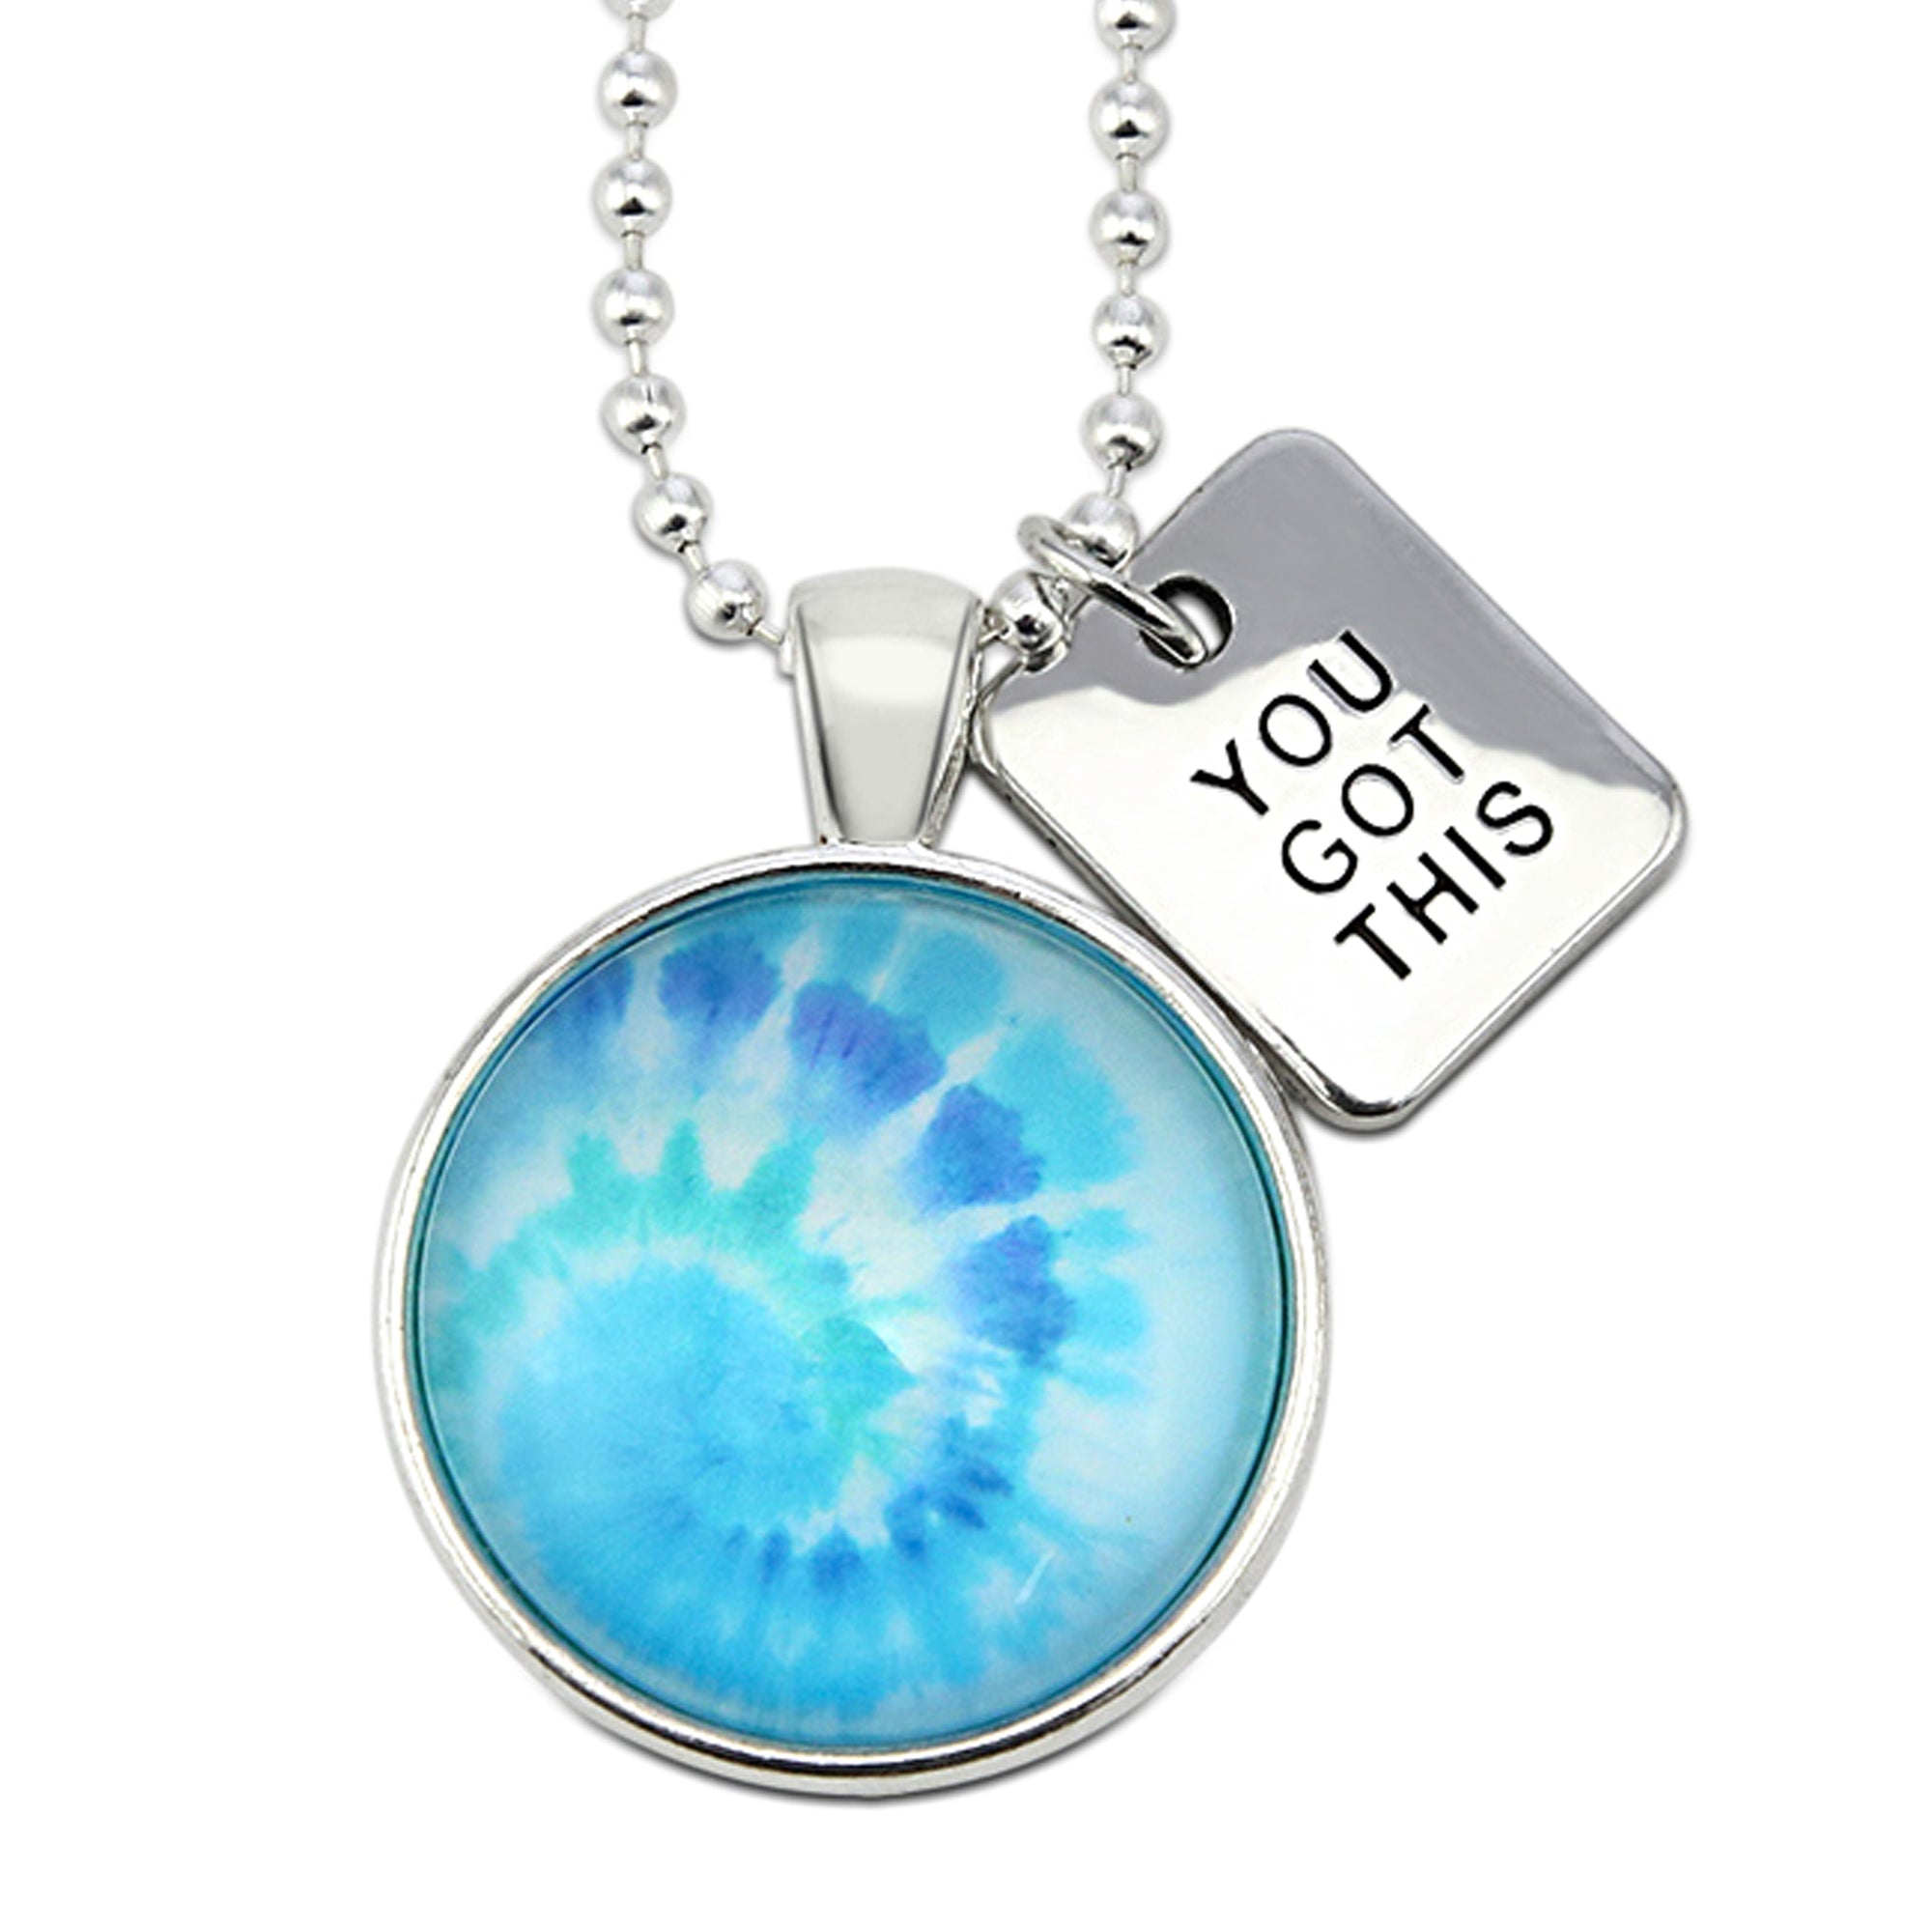 Teal tie dye print pendant necklace in bright silver with you got this charm. 